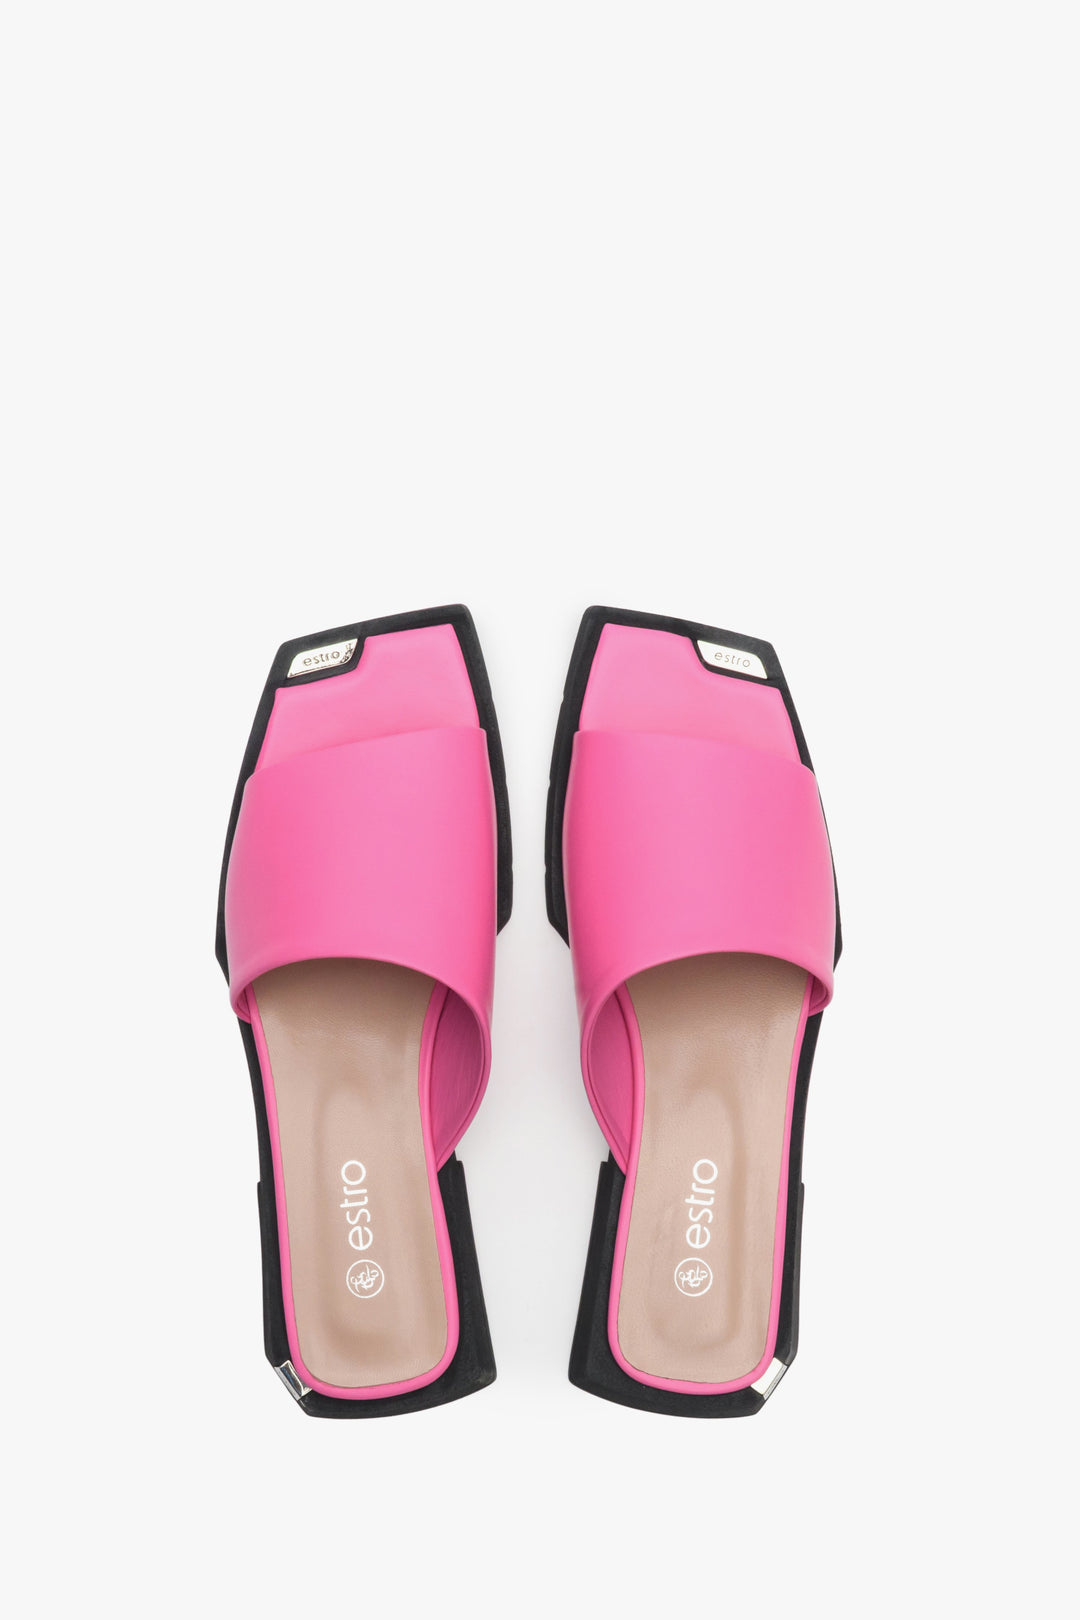 Women's leather mules for summer in pink - presentation of the back of the model.